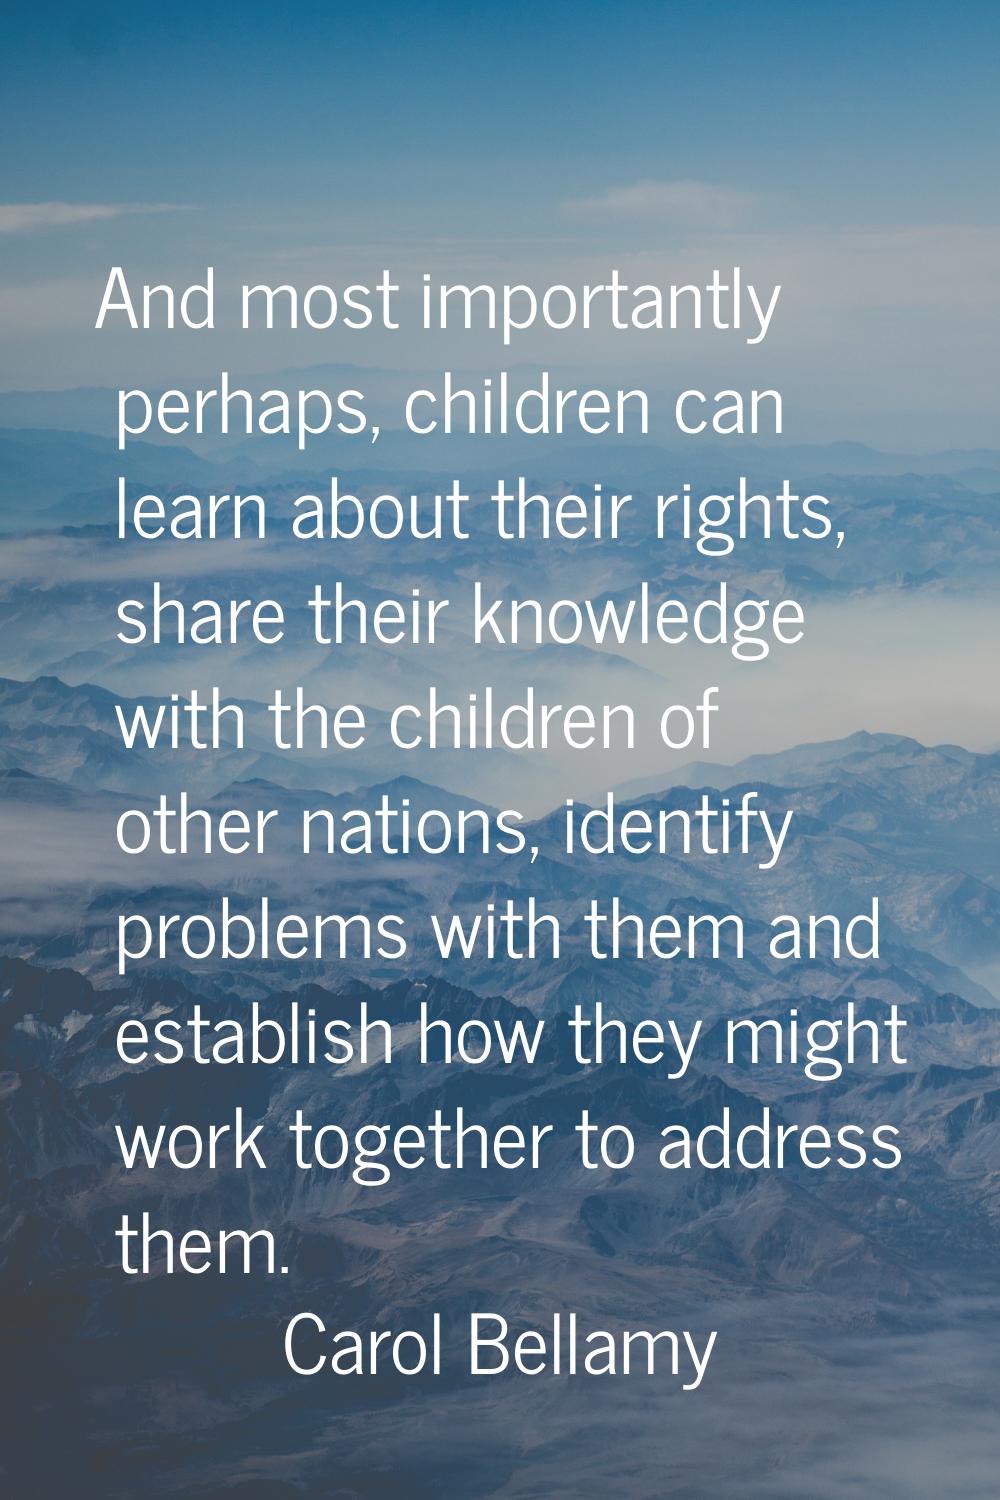 And most importantly perhaps, children can learn about their rights, share their knowledge with the